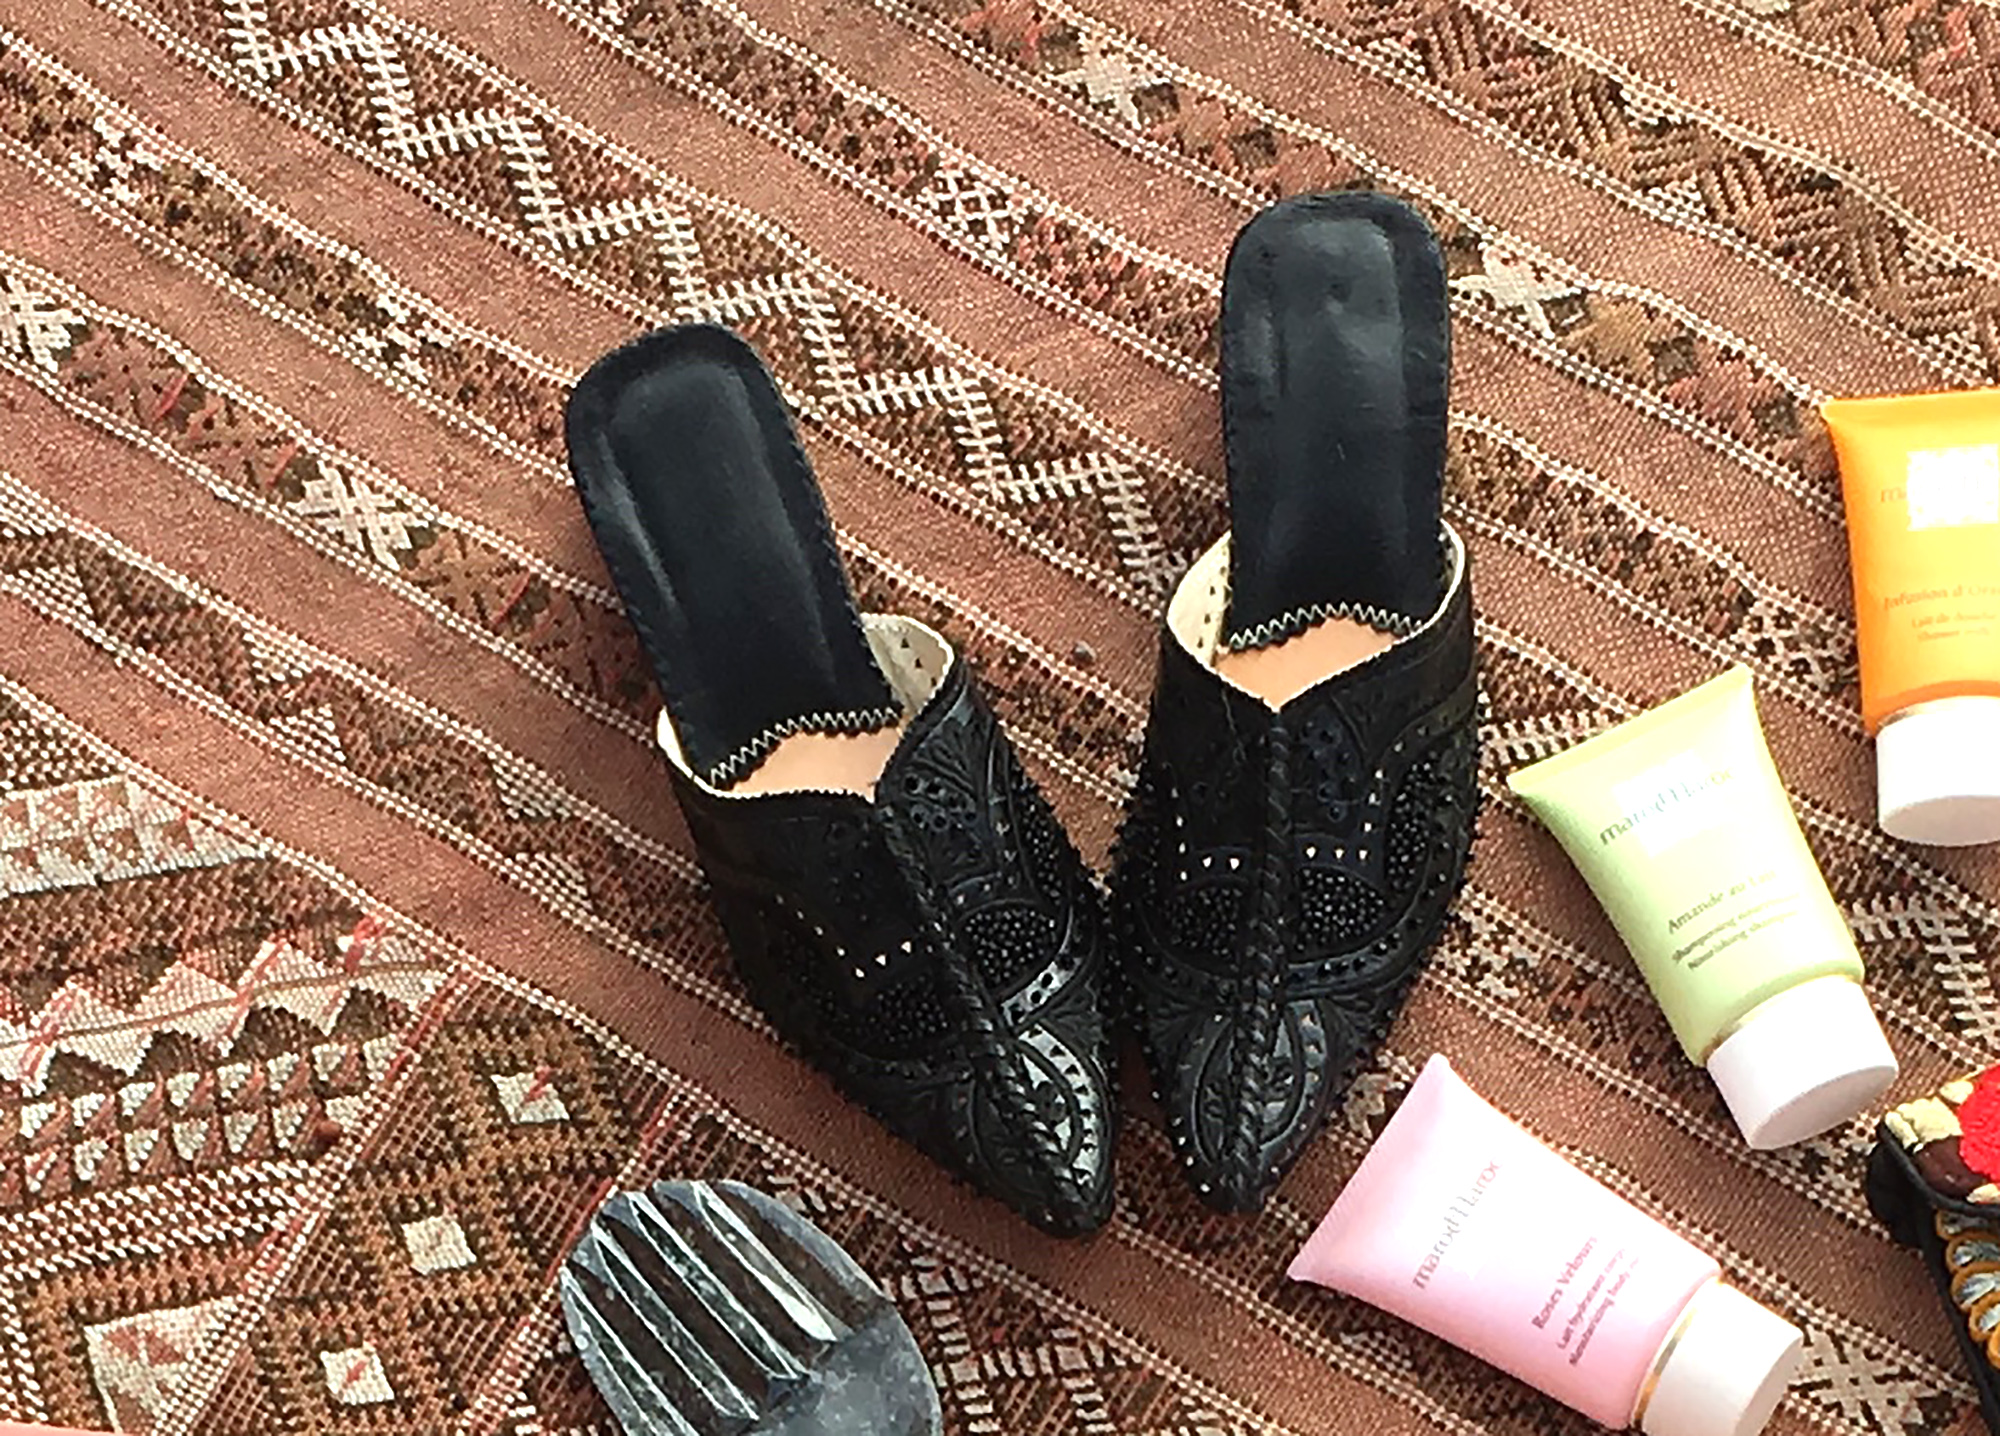 The Souks of Marrakech, Barbouche Slippers